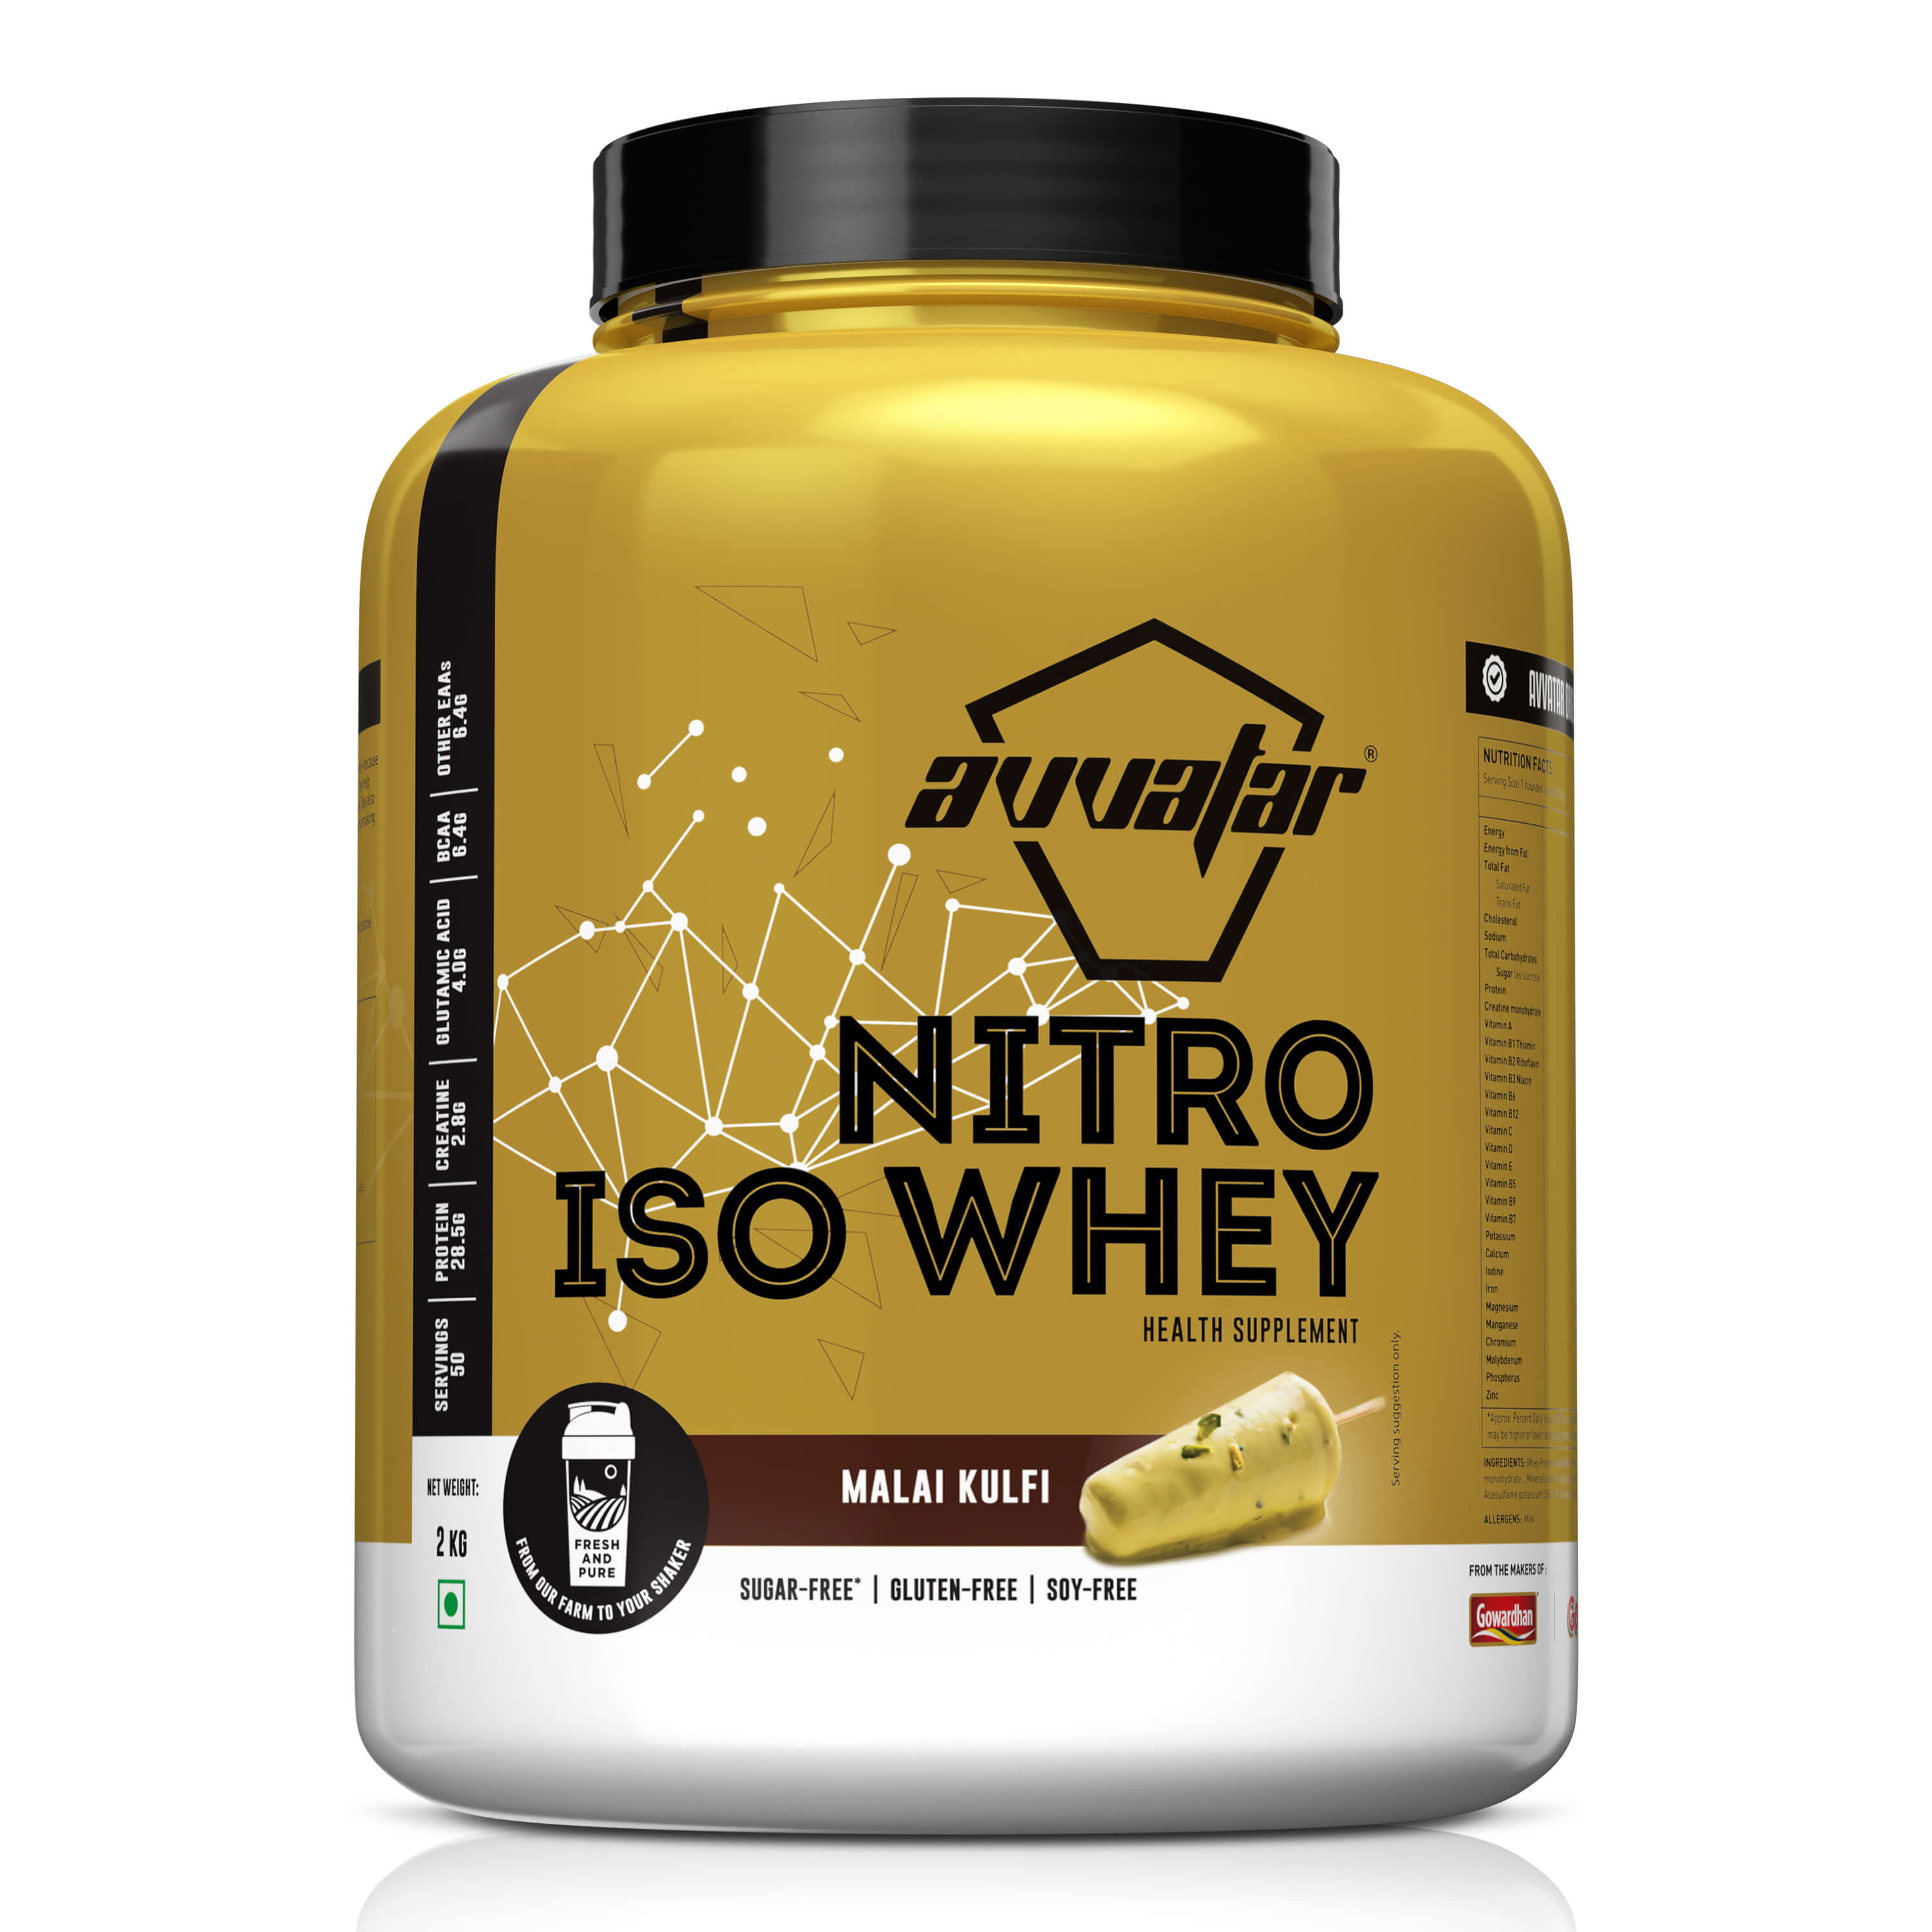 Boost your workouts with Avvatar's 2 kg Nitro Iso Whey Protein in the delectable Malai Kulfi flavor, available online at the best price. Buy now!